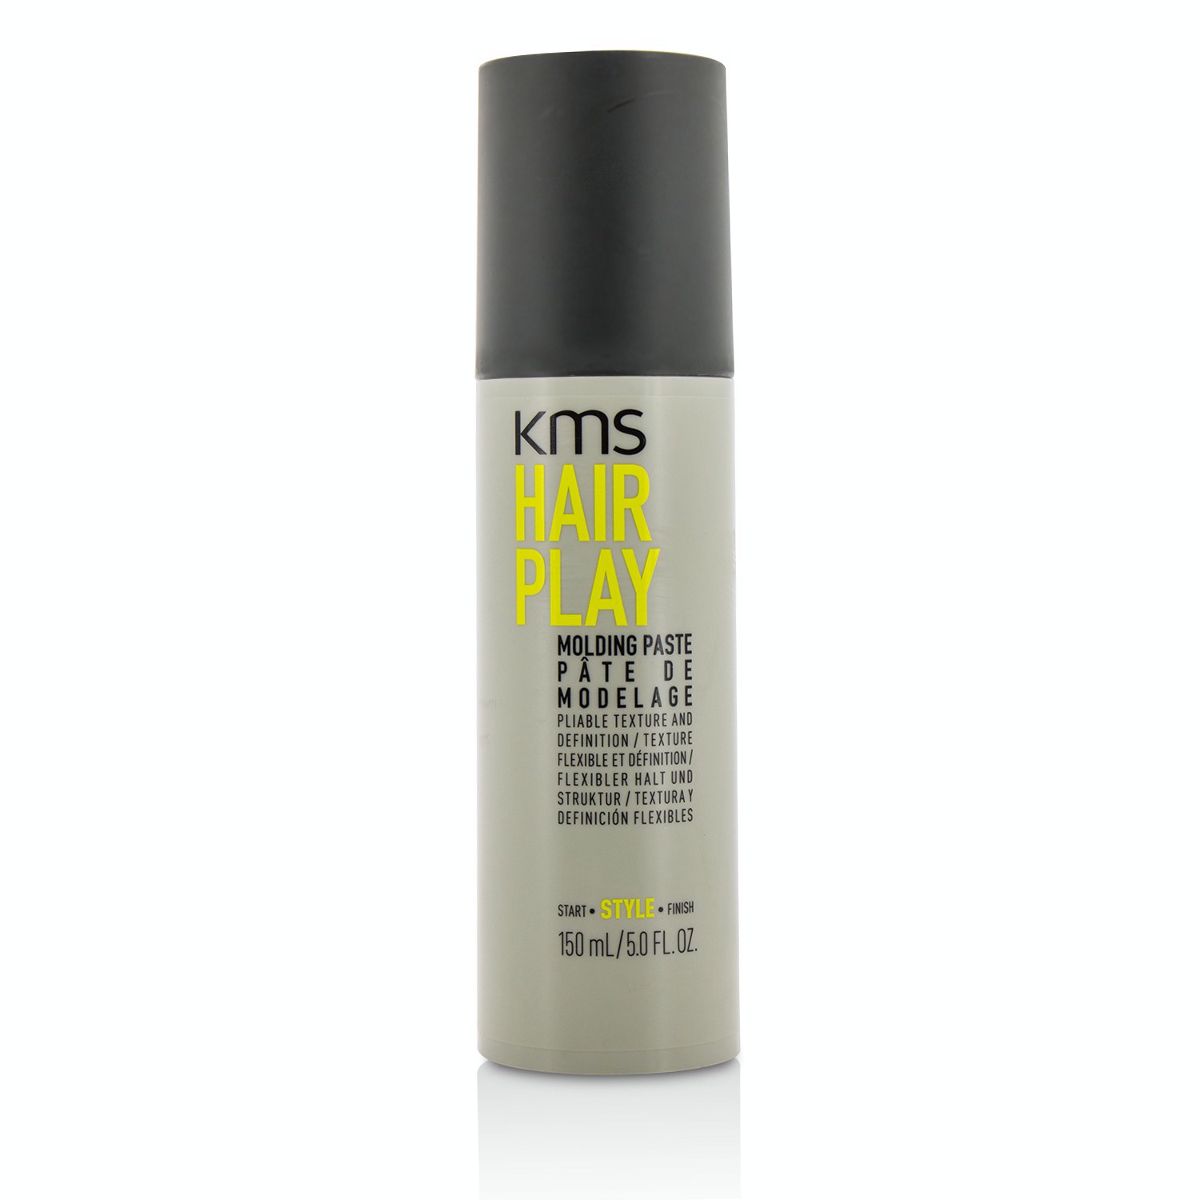 Hair Play Molding Paste (Pliable Texture And Definition) KMS California Image